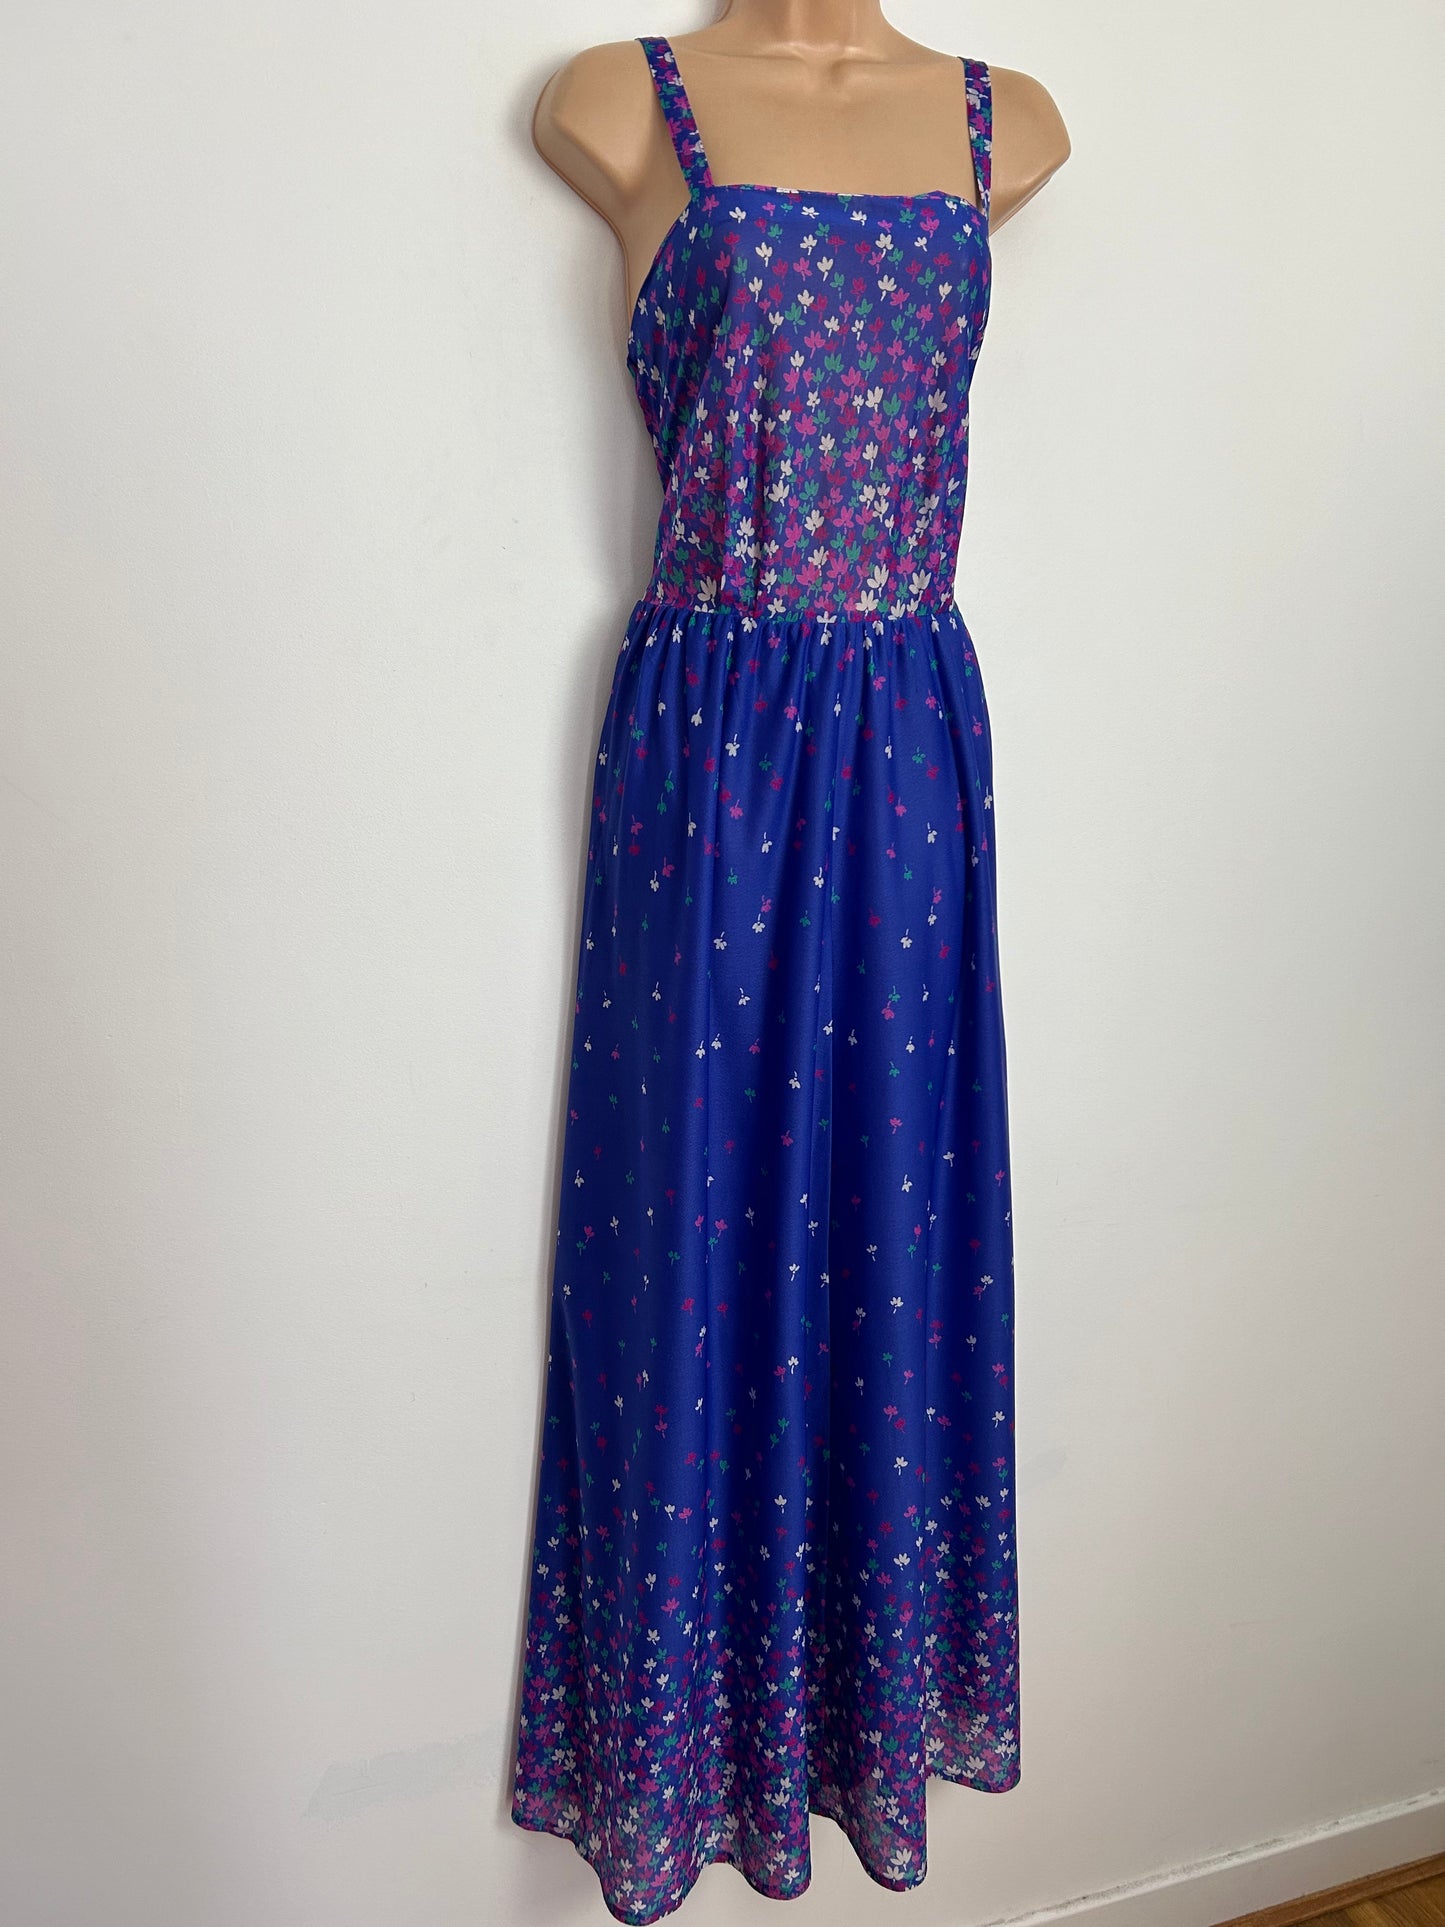 Vintage Late 1970s UK Size 10 Blue Pink Green & White Floral Print Strappy Maxi Dress